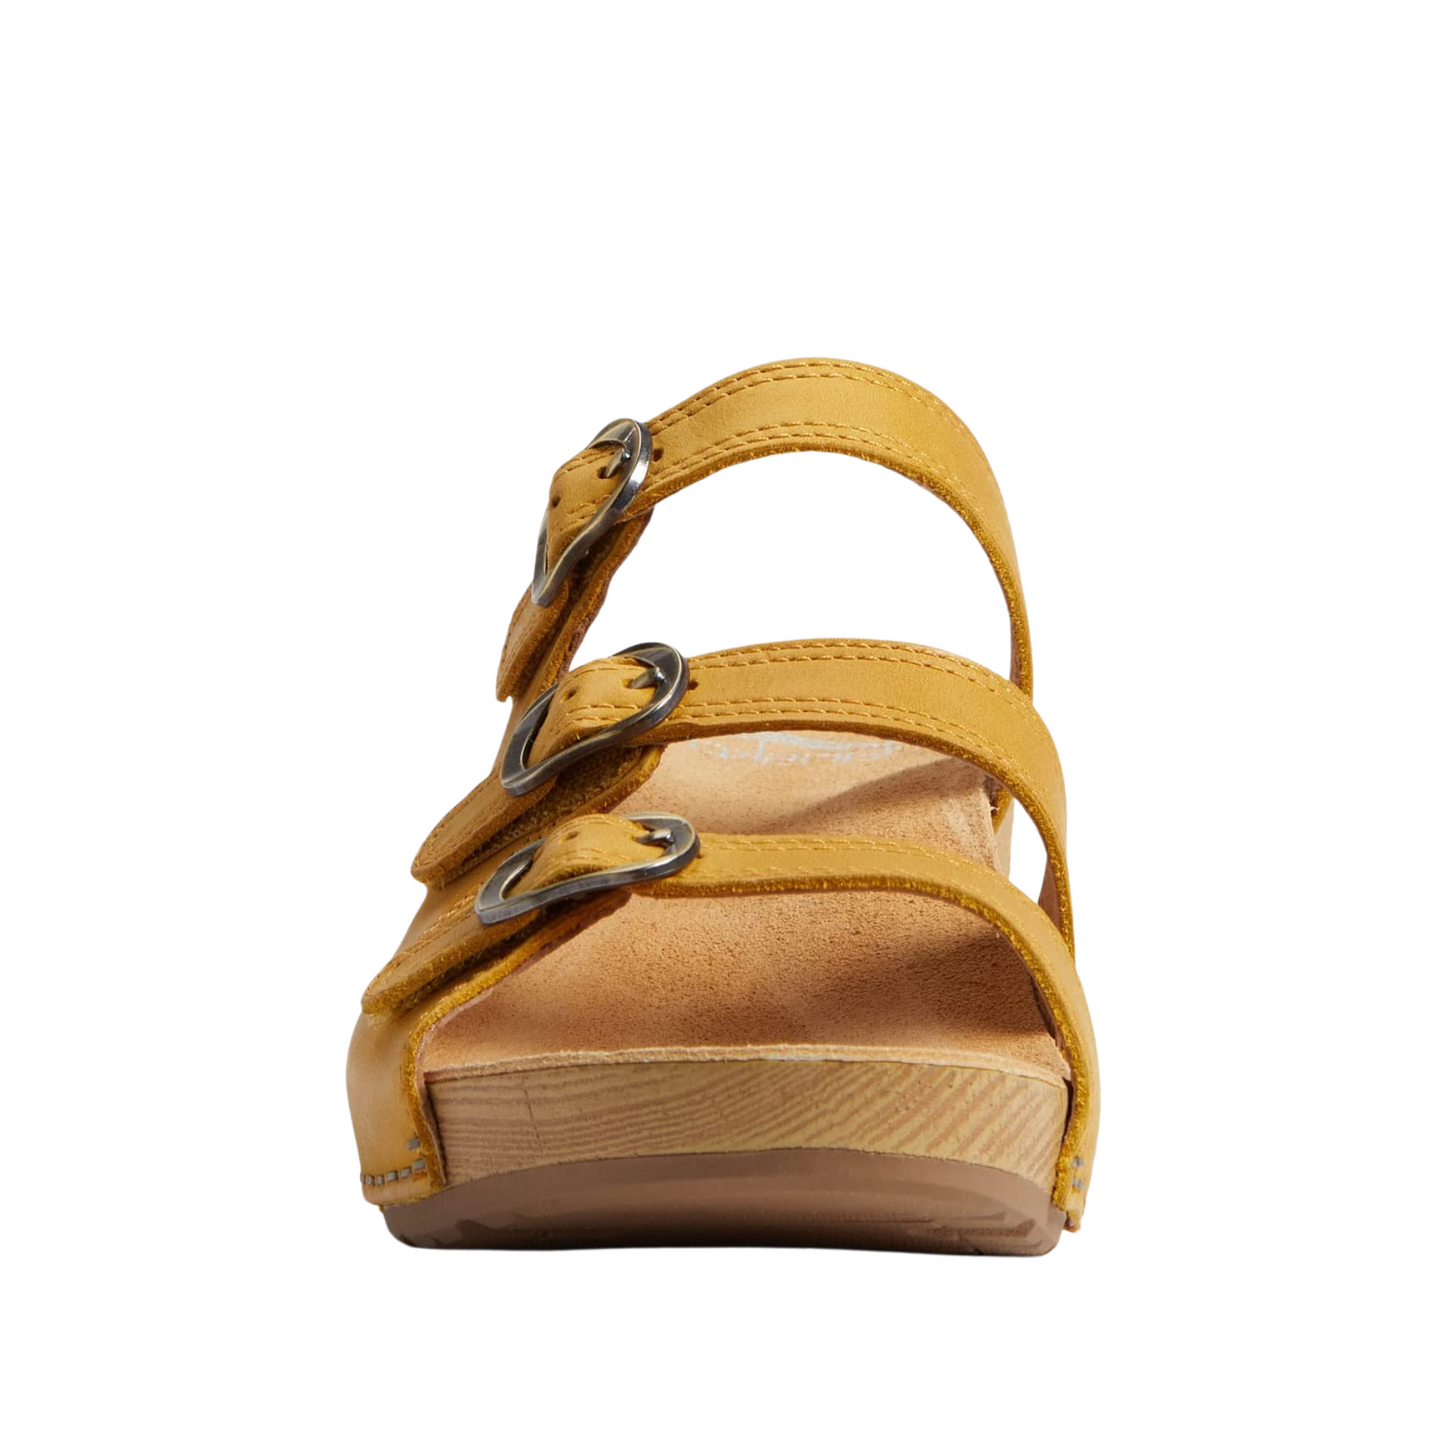 A front view of a sandal with three yellow leather straps.